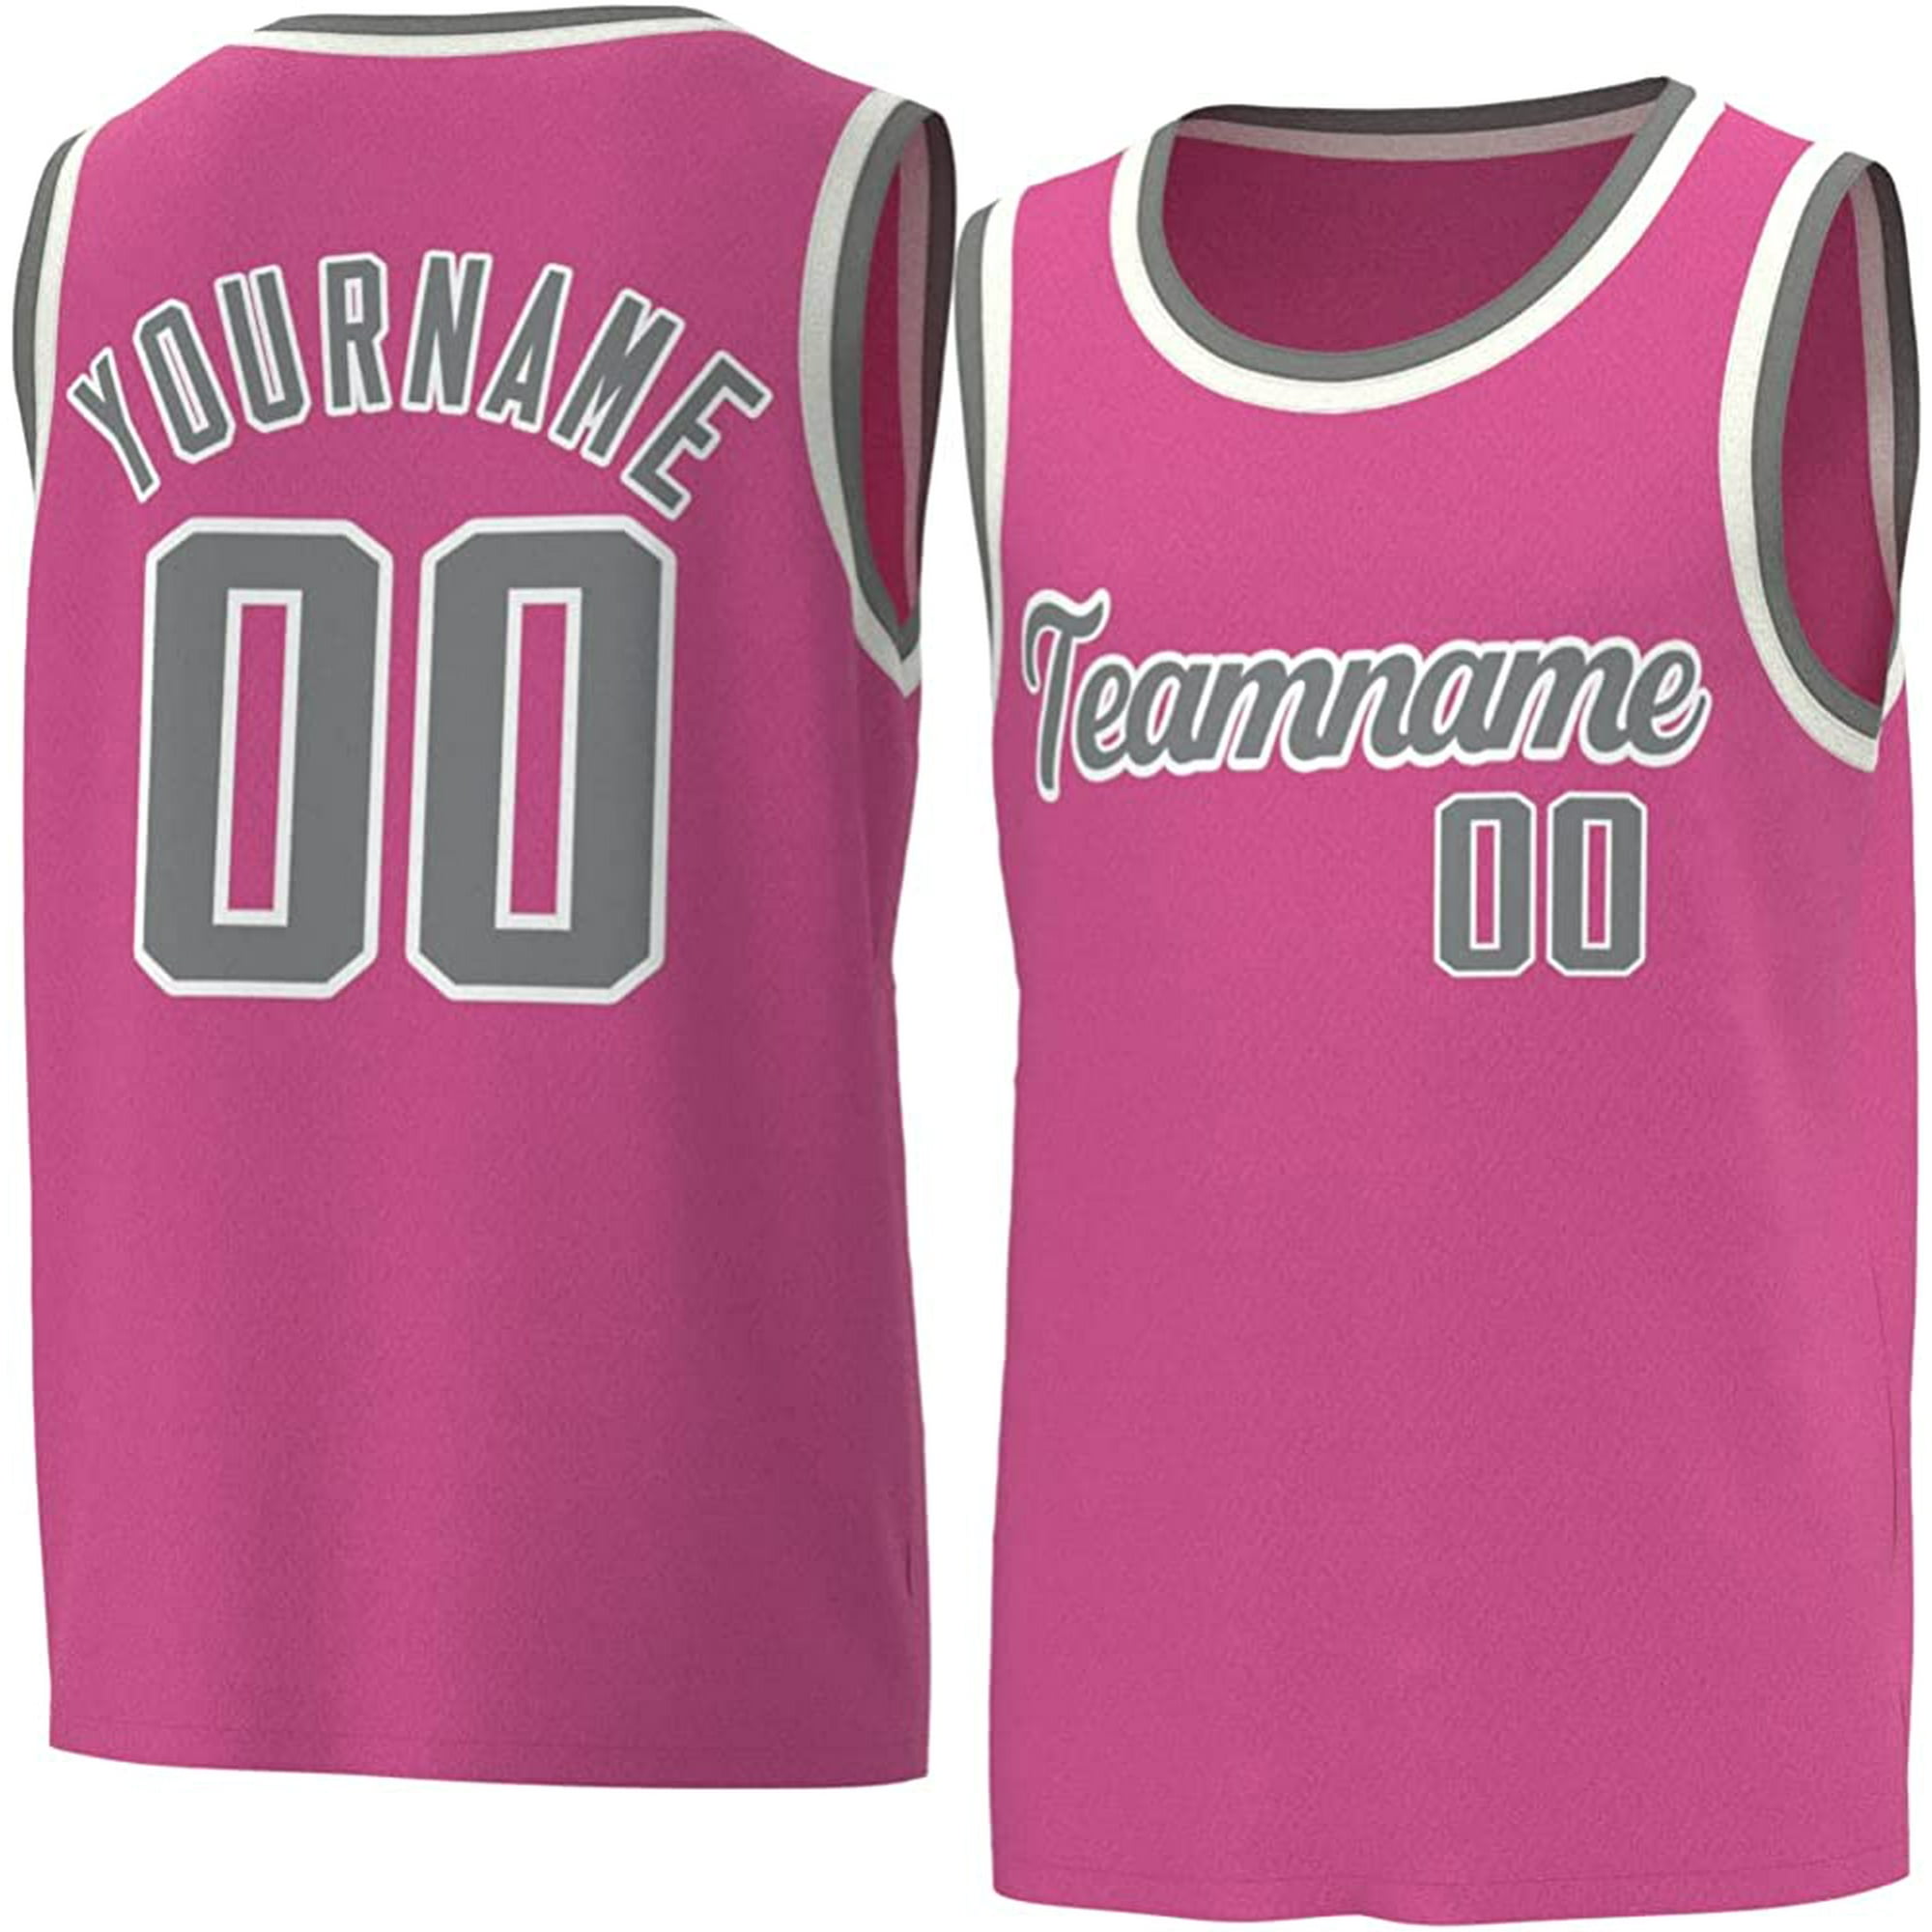  Custom Men Youth Basketball Jersey Printed or Stitched